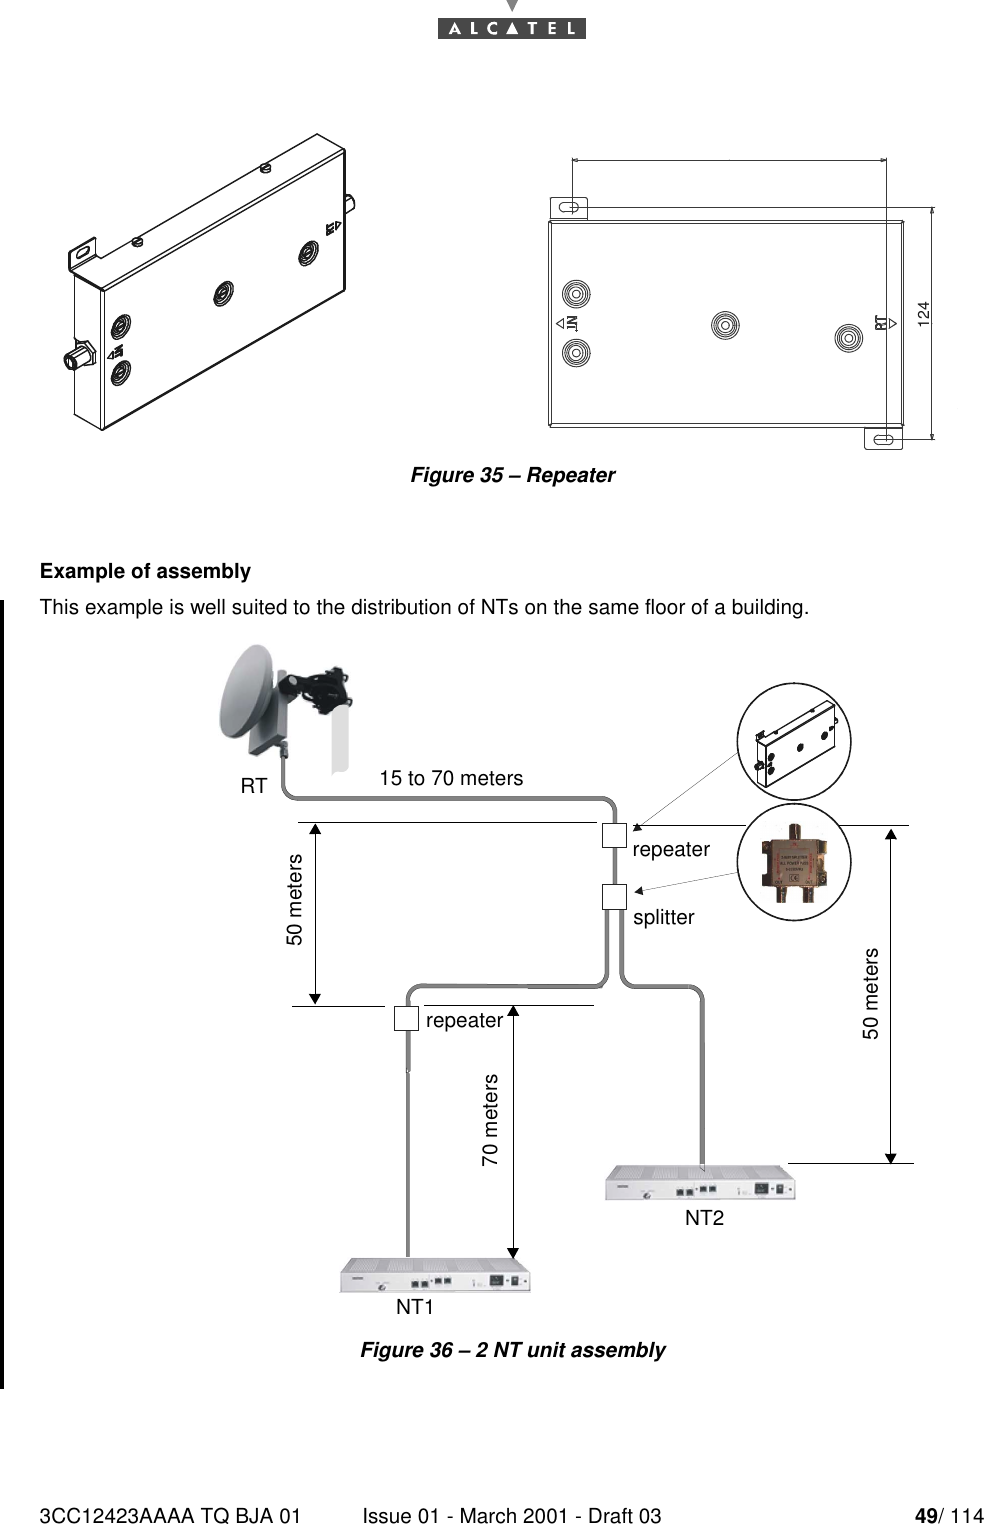 3CC12423AAAA TQ BJA 01 Issue 01 - March 2001 - Draft 03 49/ 11452Figure 35 – RepeaterExample of assemblyThis example is well suited to the distribution of NTs on the same floor of a building.Figure 36 – 2 NT unit assembly124RT 15 to 70 metersNT1NT270 meters50 metersrepeatersplitterrepeater50 meters